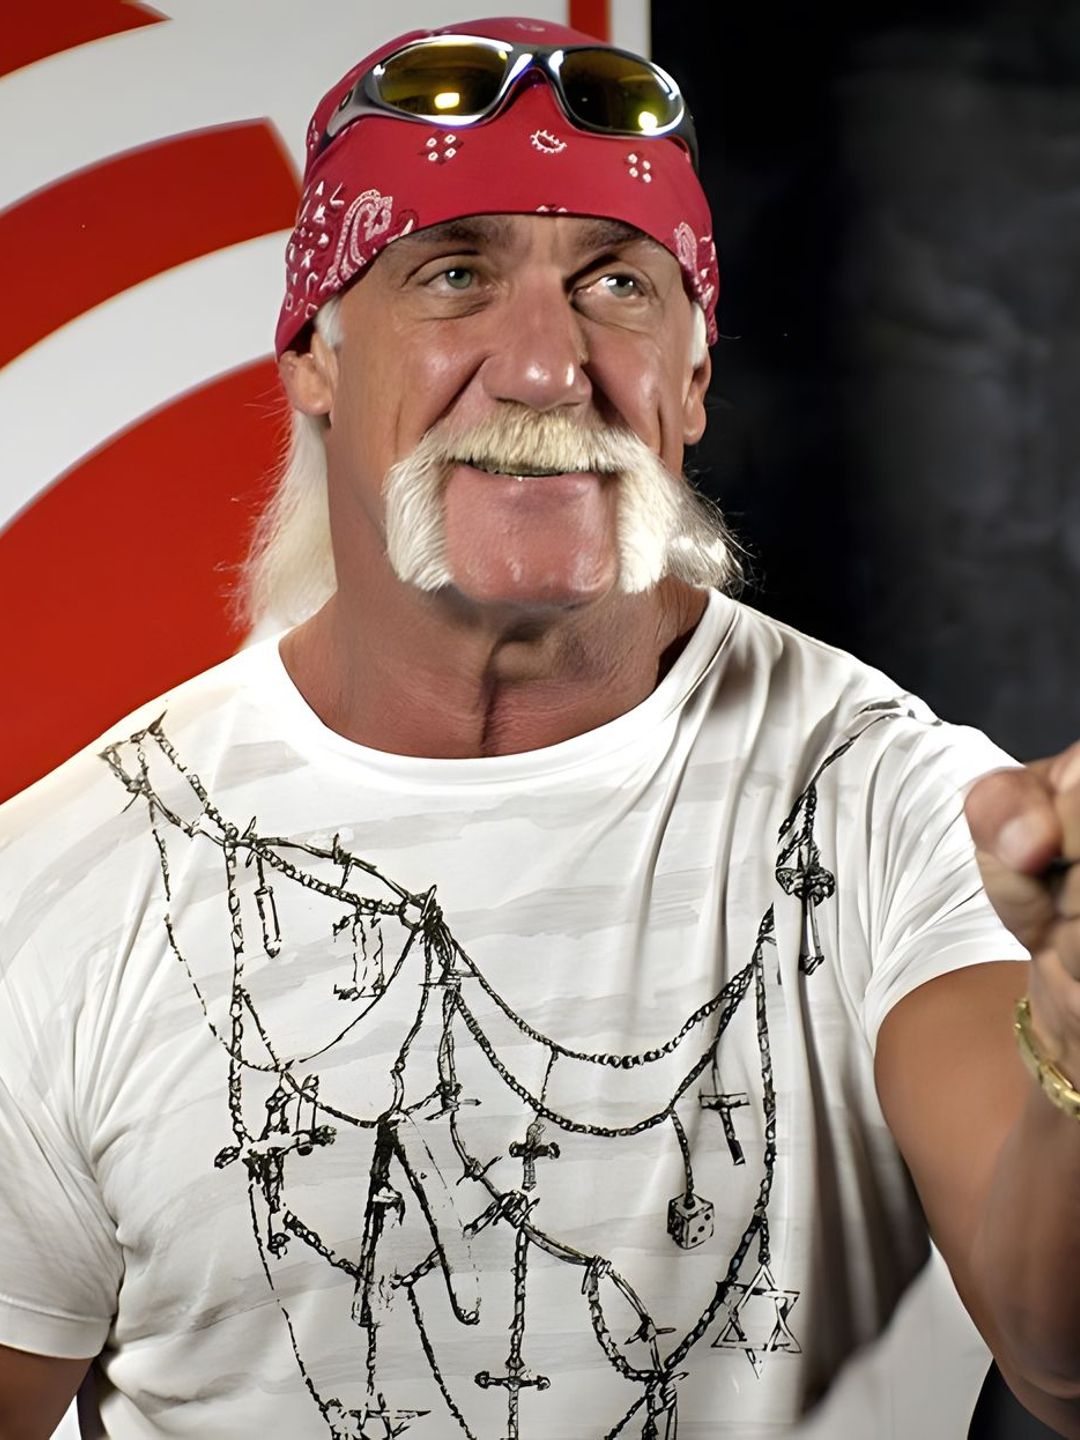 Hulk Hogan who is his father